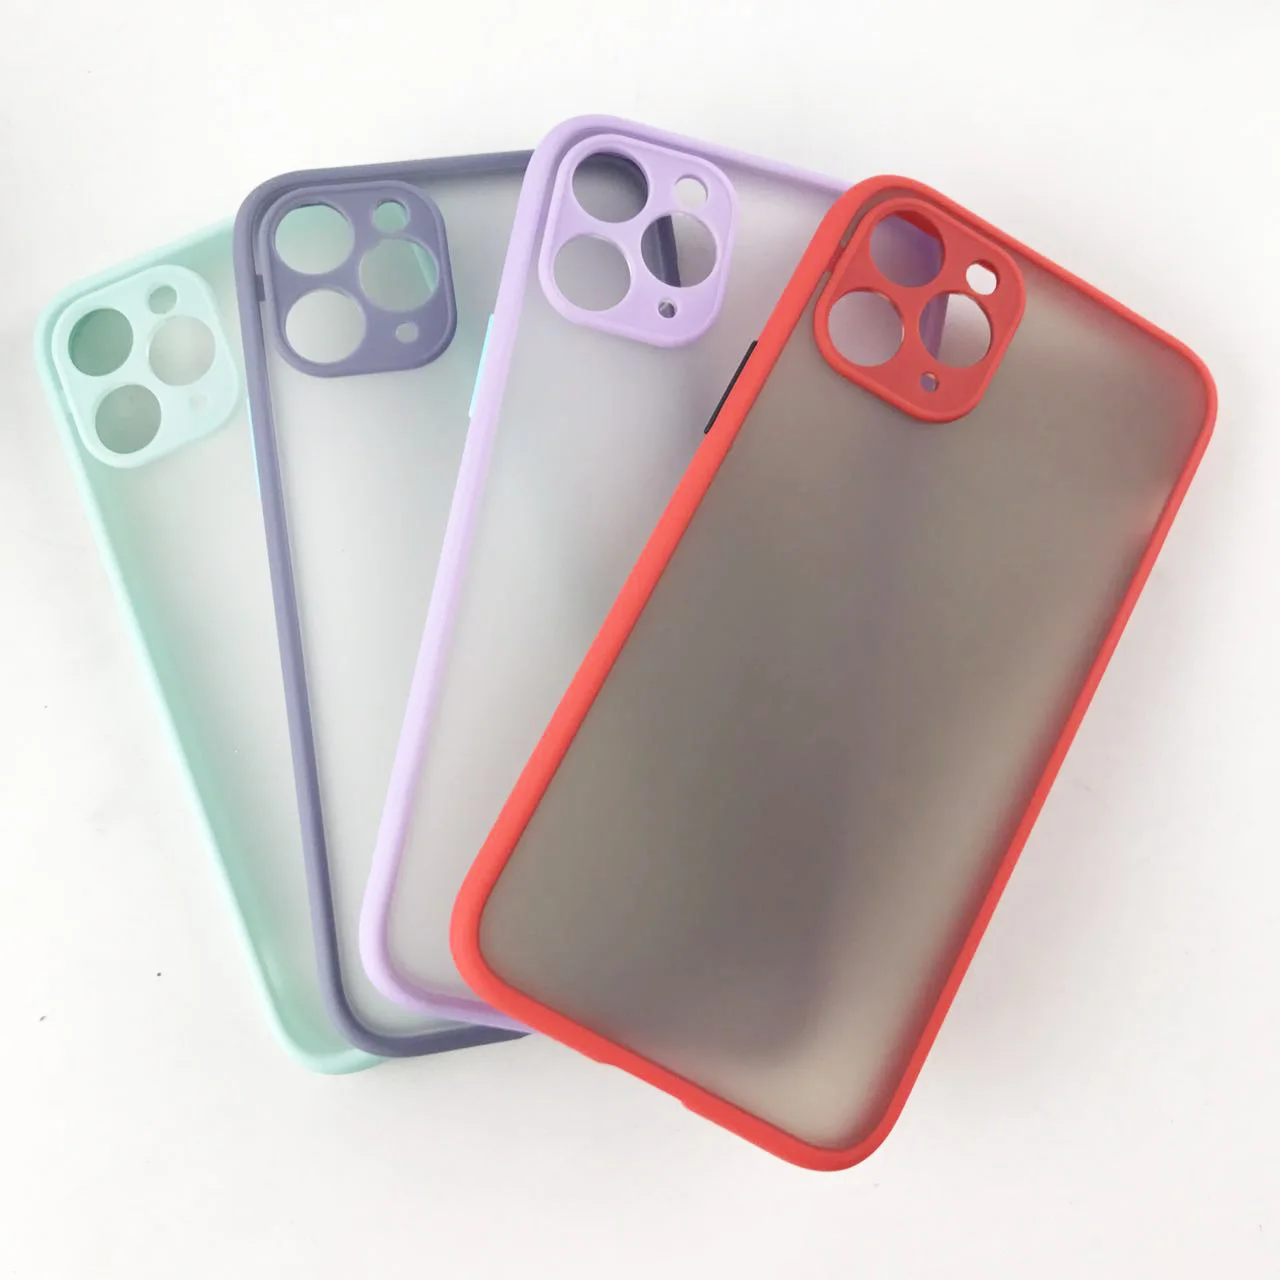 

Candy Color Matte PC Translucent Hard Shell Cover Hybrid TPU Cell Phone Back Case For iPhone 11 12 Pro